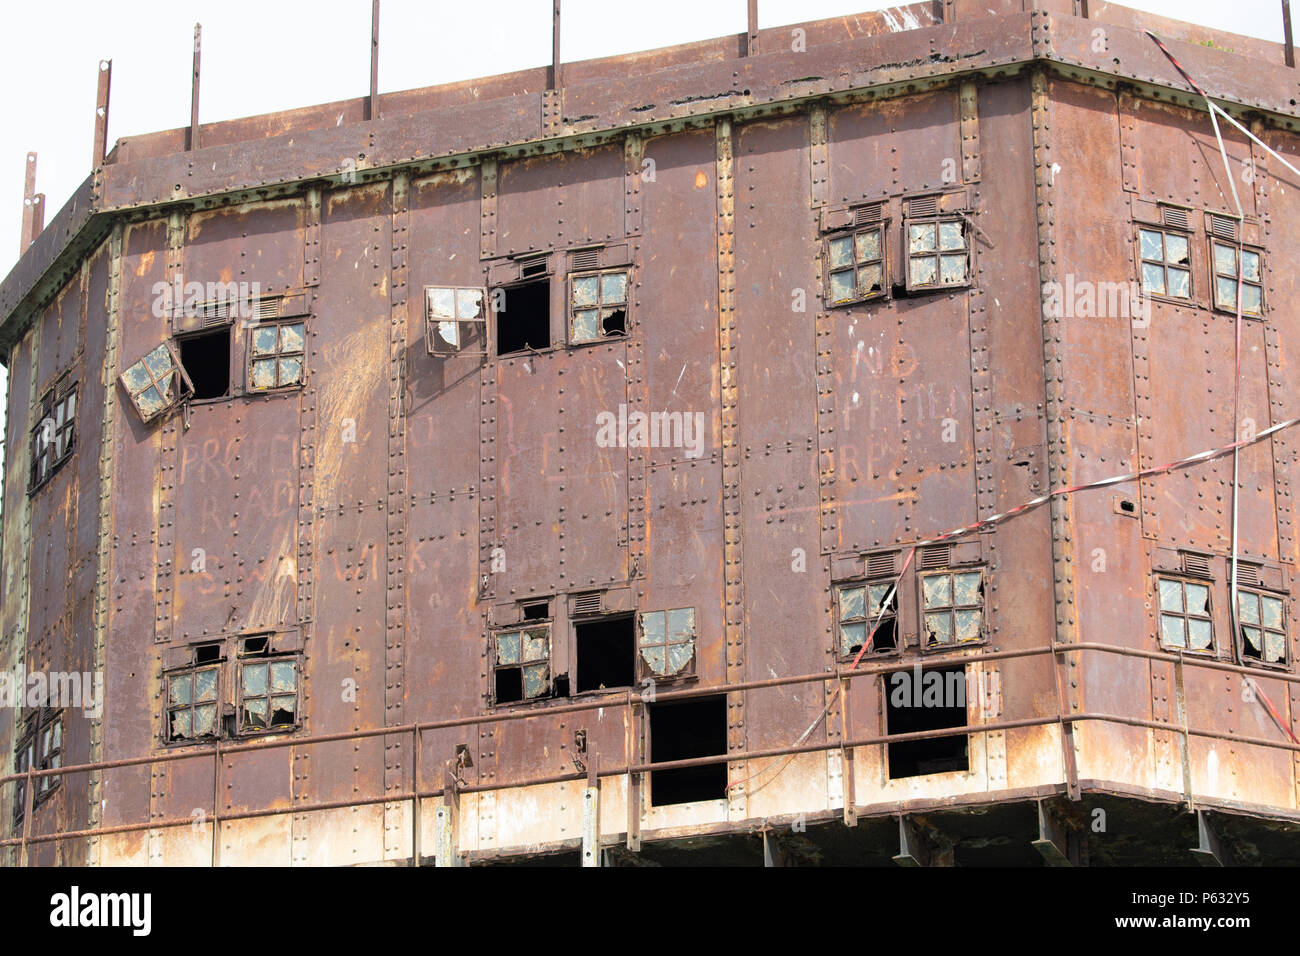 Maunsell Forts - Red Sands sea forts now abandoned, Close up of the disrepair showing rust and damaged windows Stock Photo